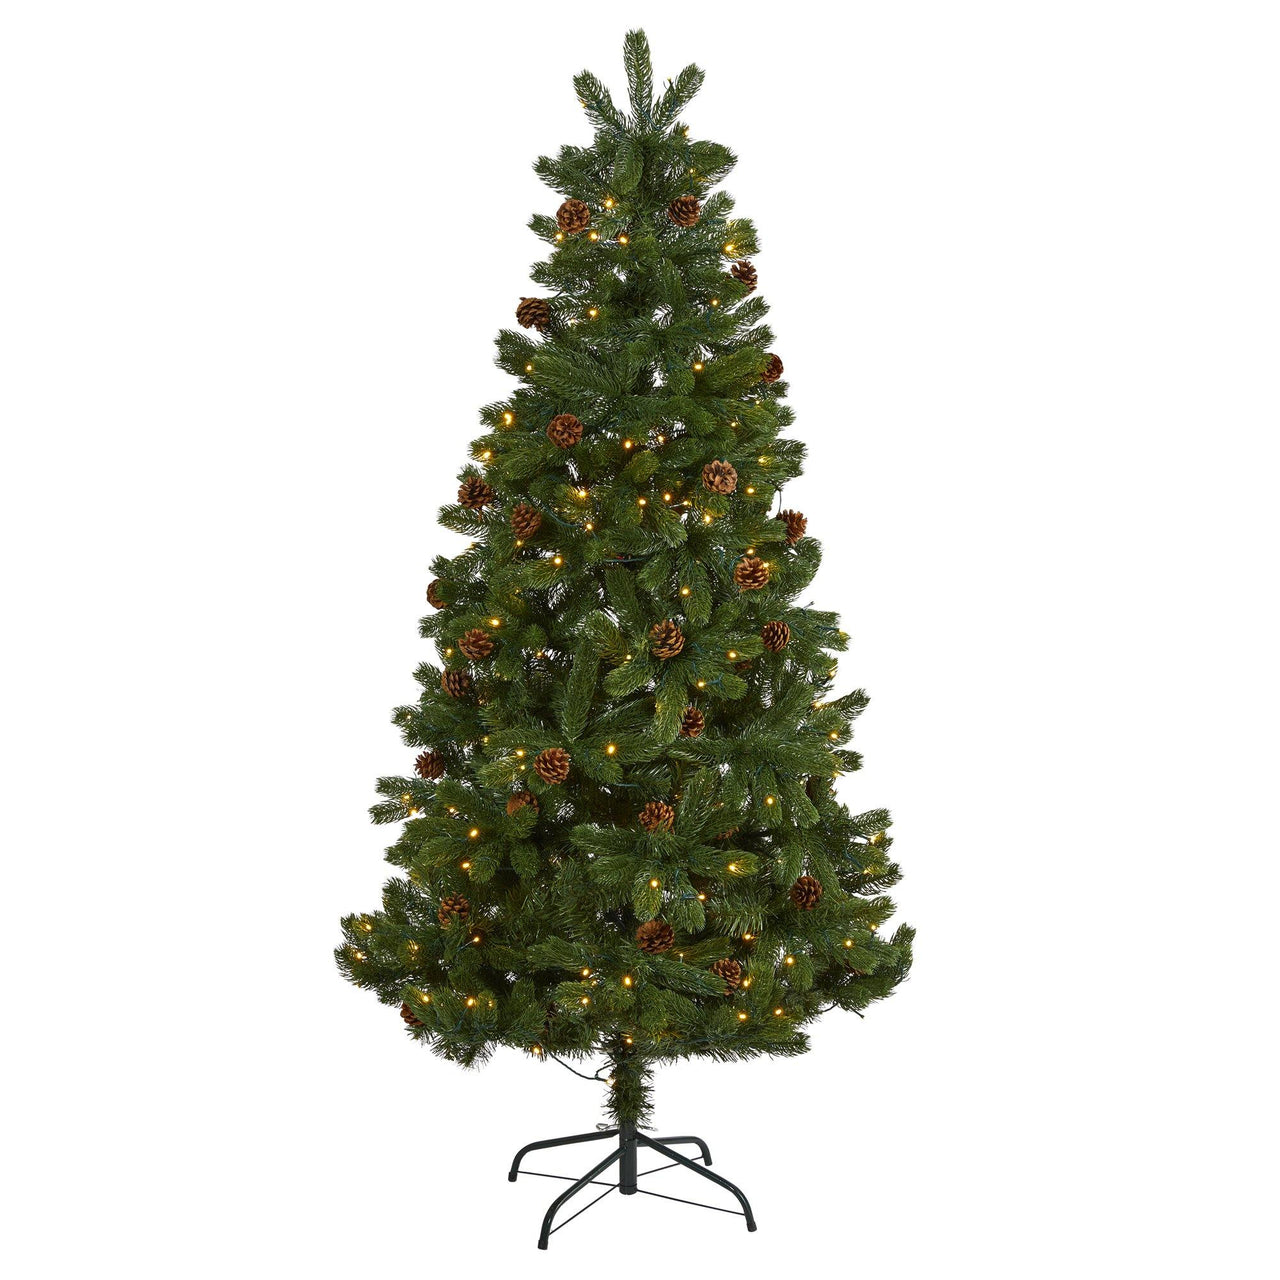 6' Rocky Mountain Spruce Artificial Christmas Tree with Pinecones and 250 Clear LED Lights